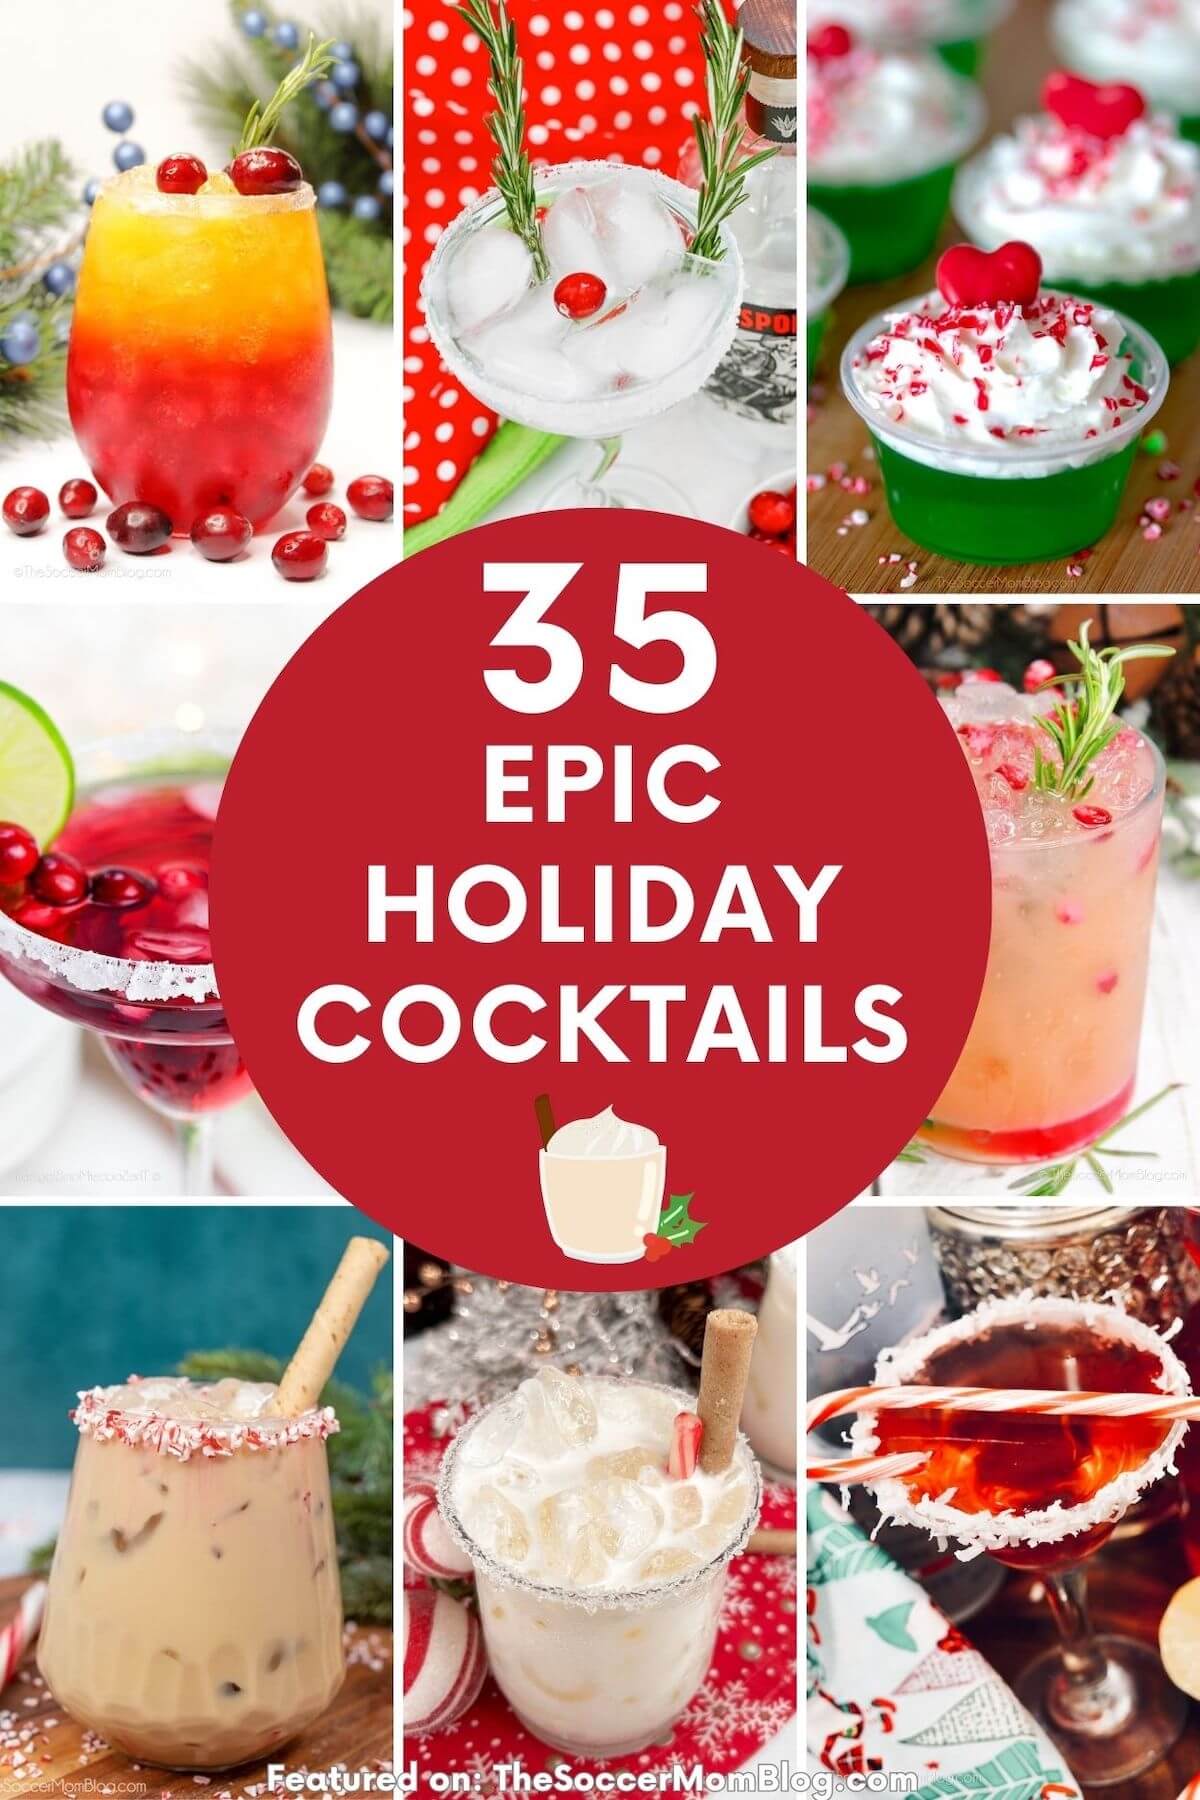 collage of Christmas themed drinks; text overlay "35 Epic Holiday Cocktails".